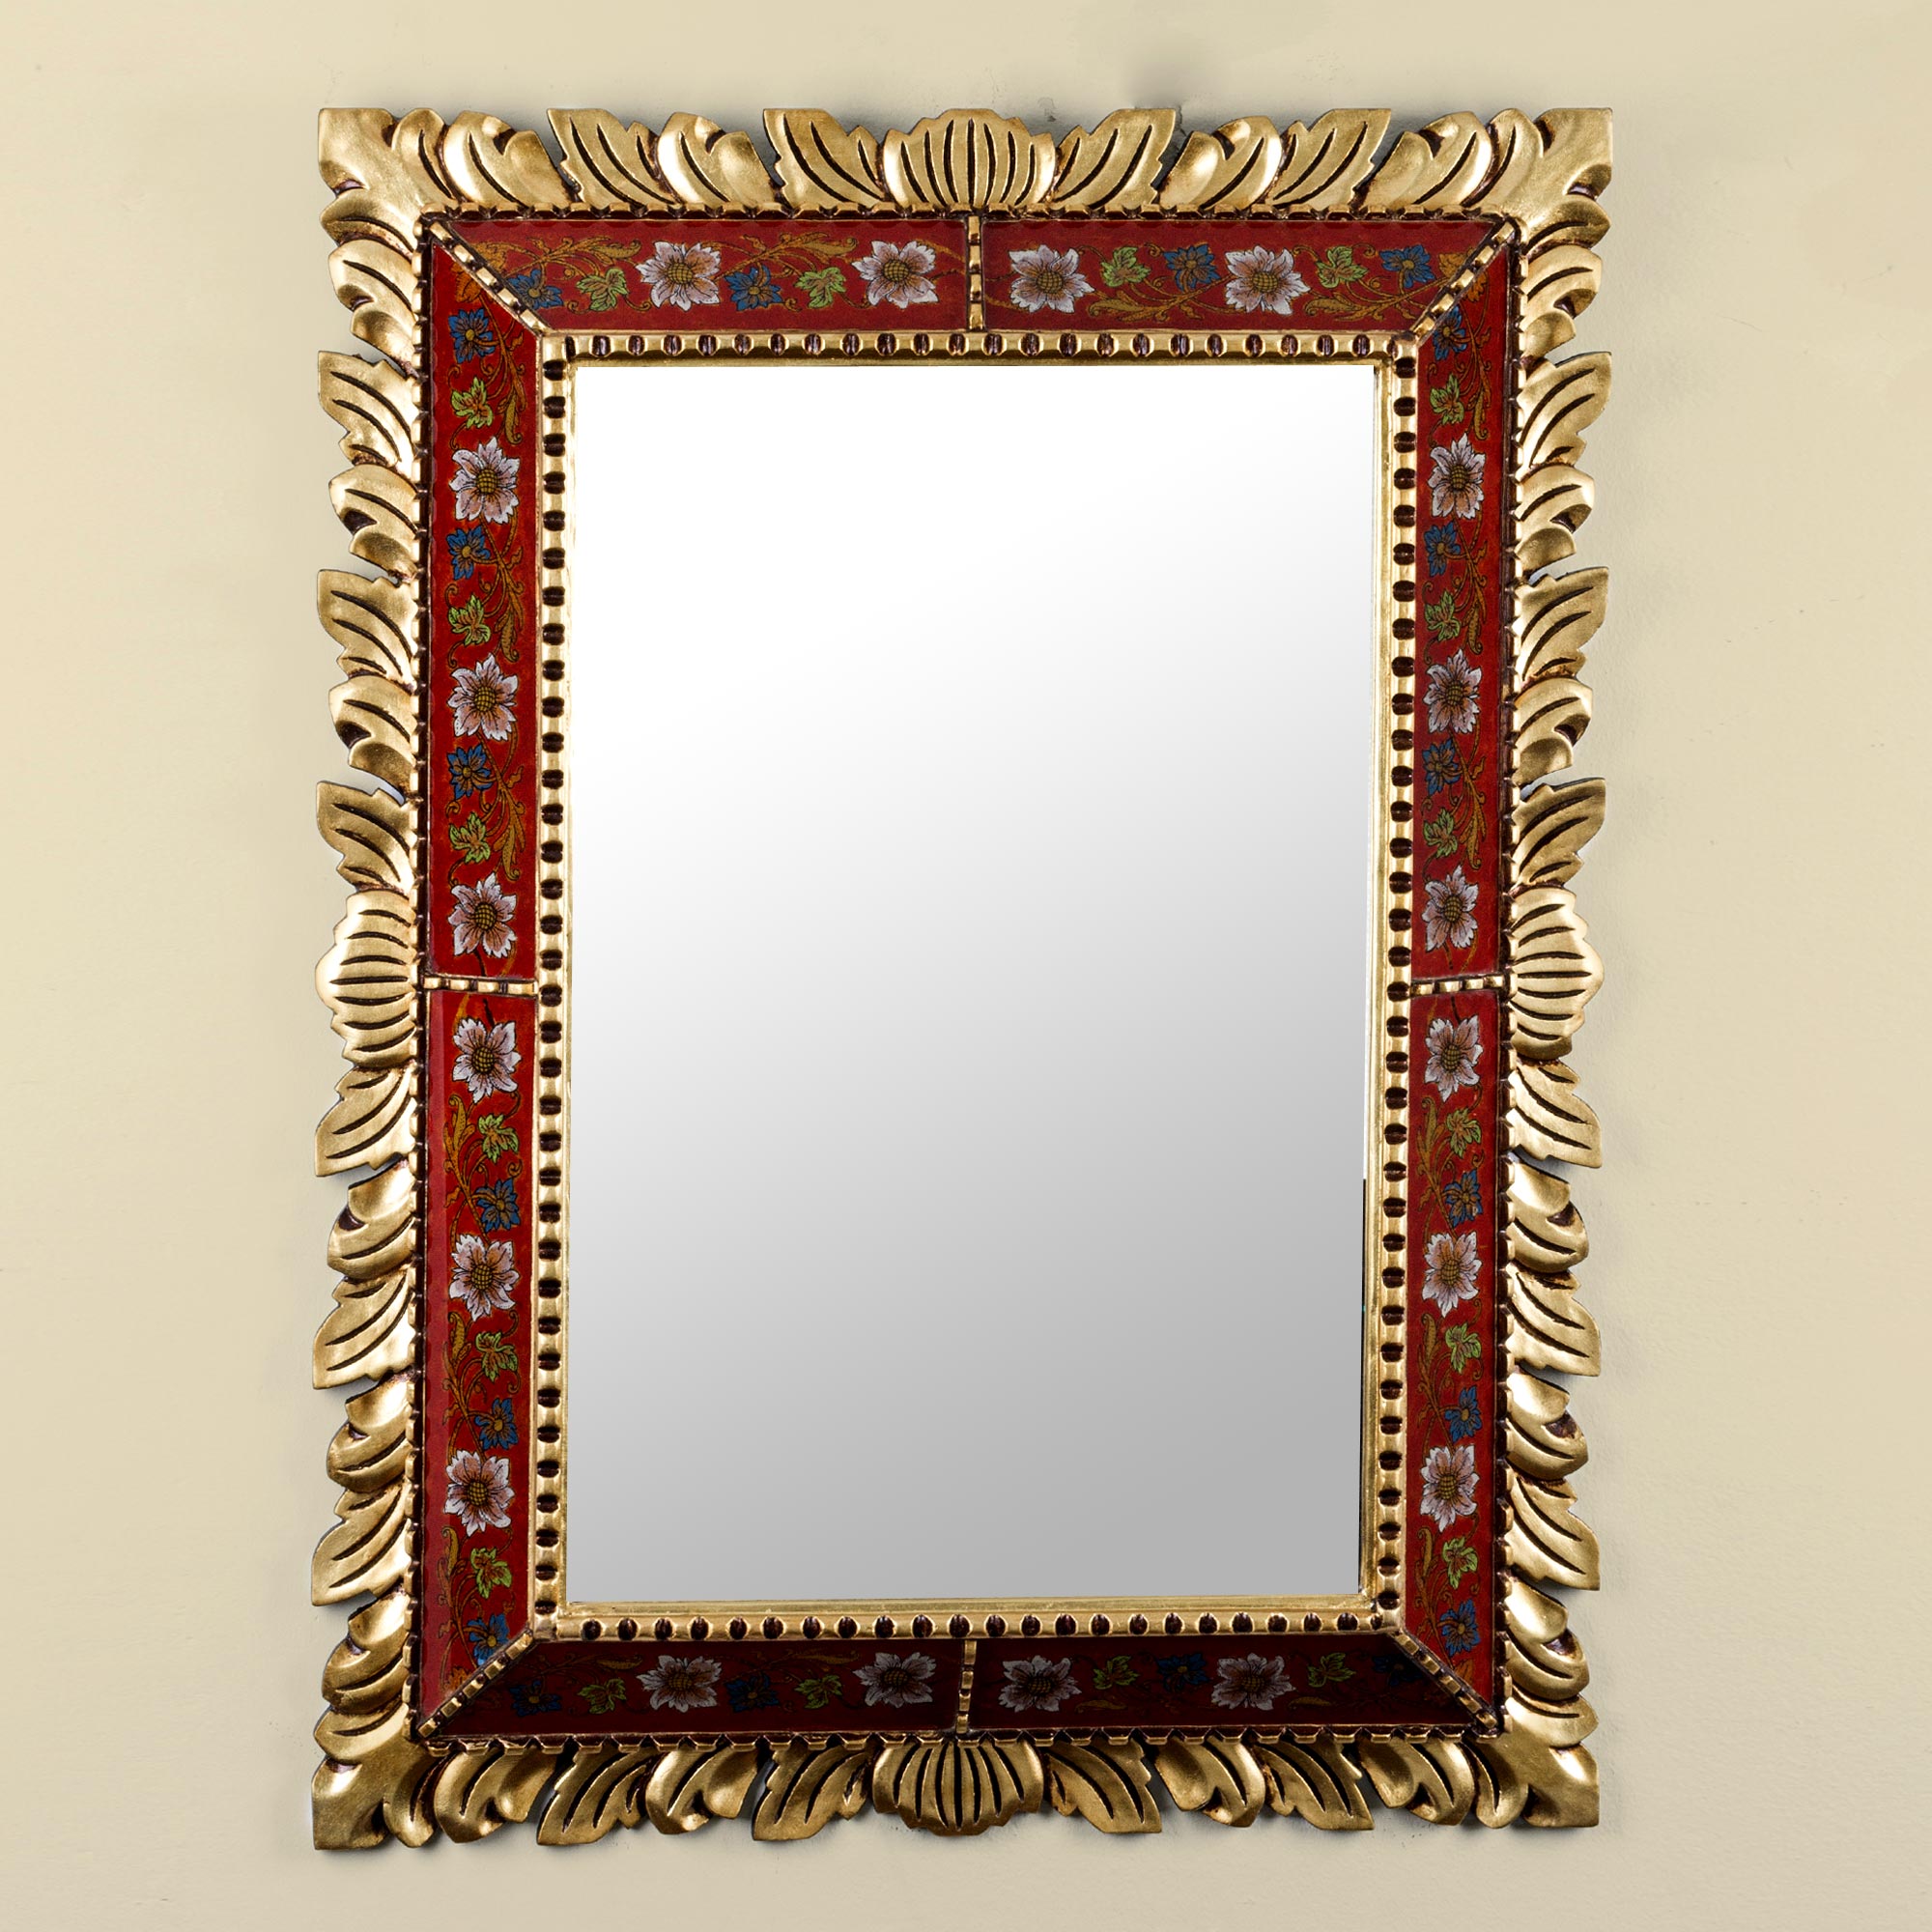 Carved Mohena Wood Floral Mirror, 'Golden Reflections' gilded gold leaf choosing a statement mirror